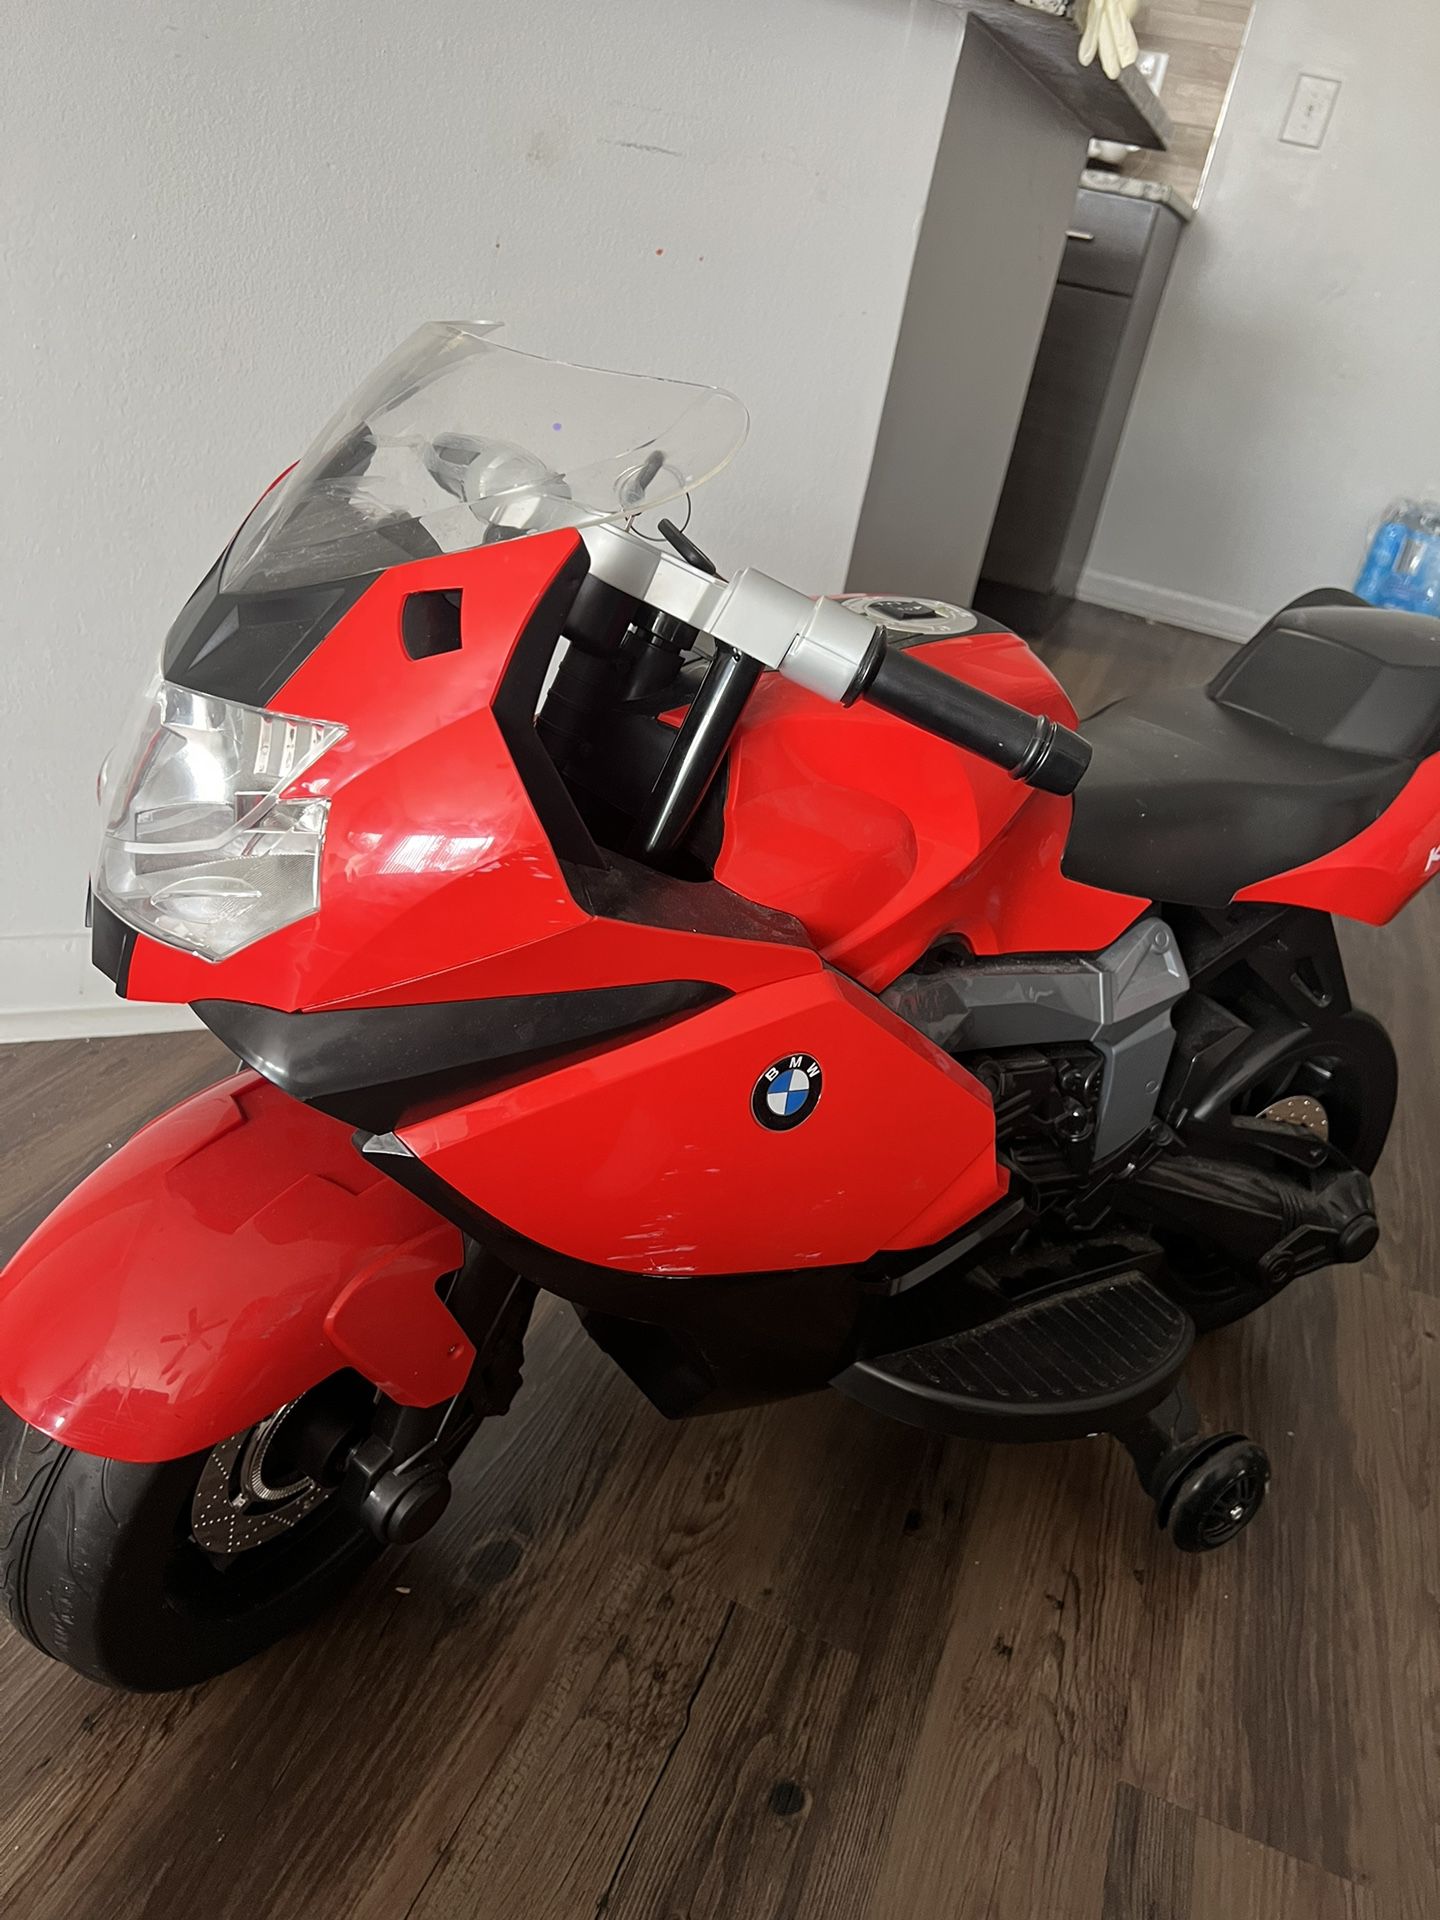 BMW electric motorcycle works normally